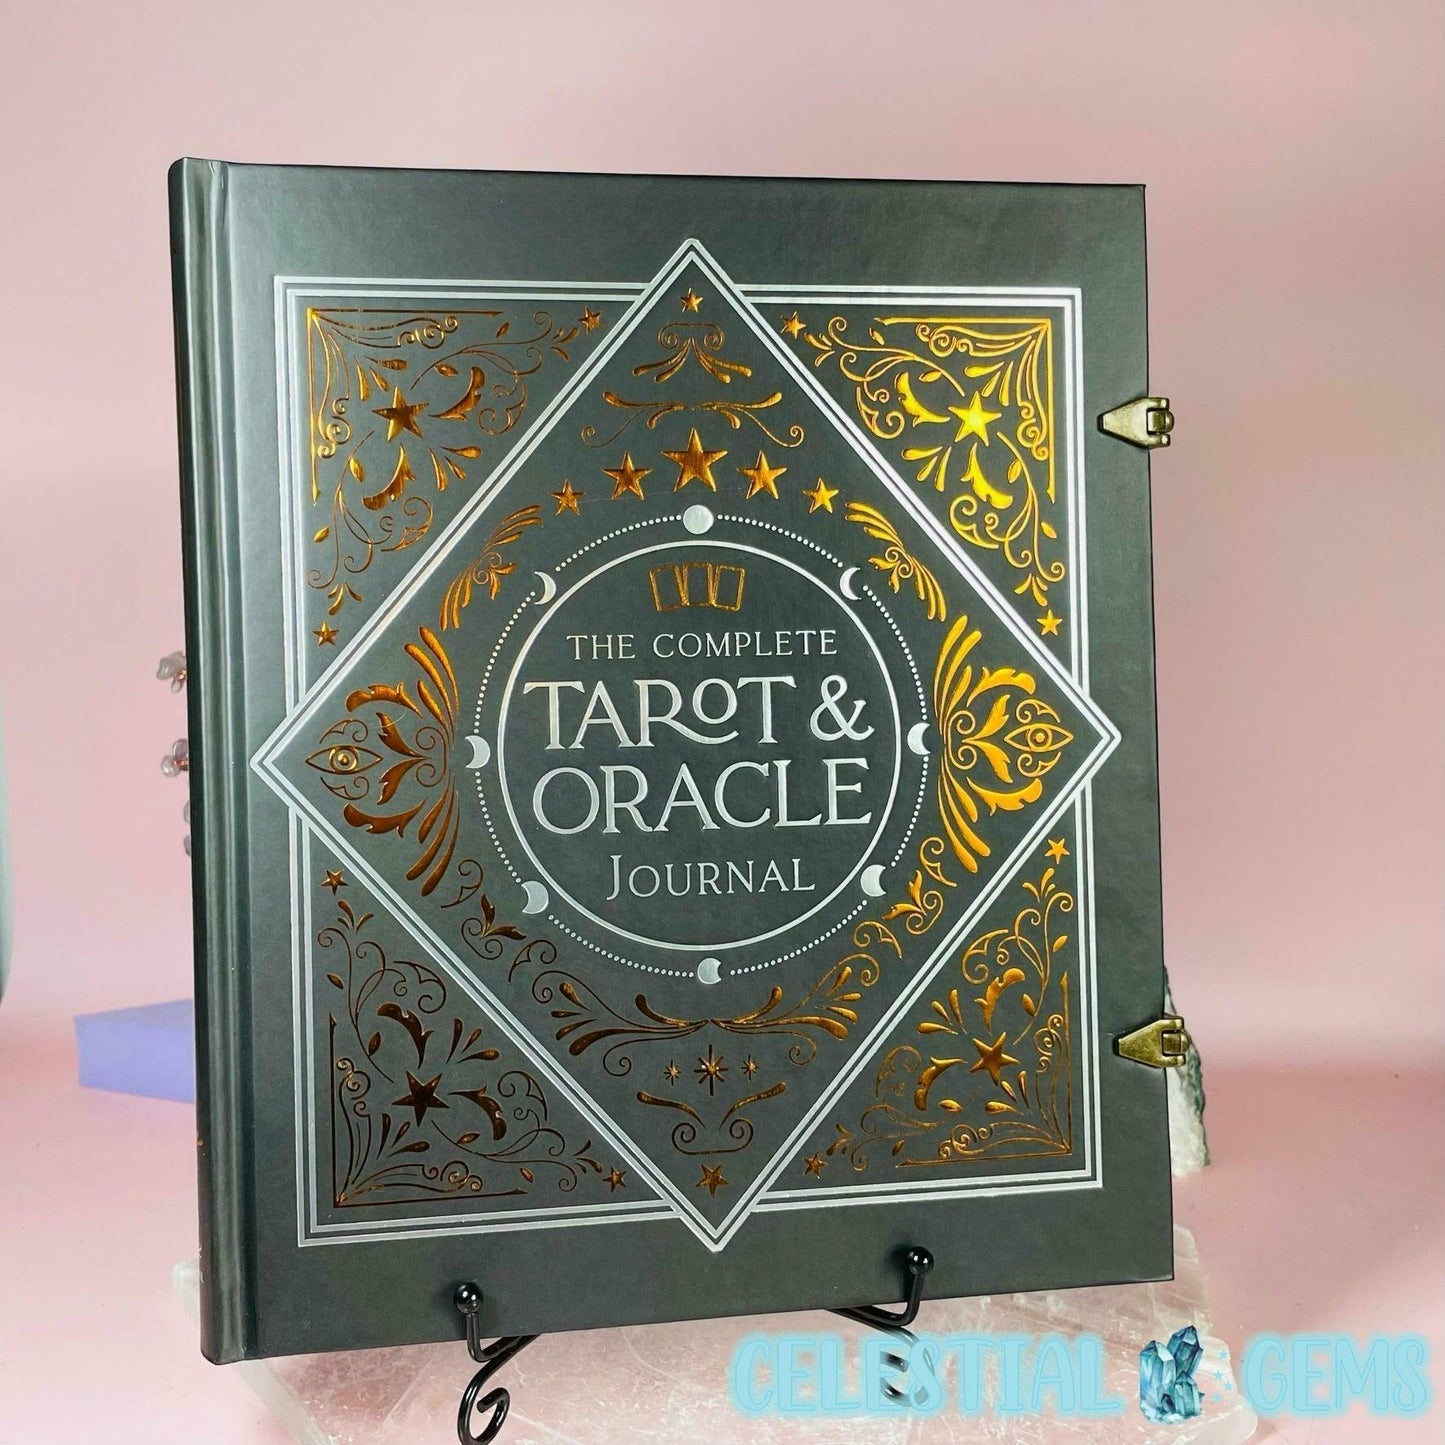 The Complete Tarot & Oracle Journal Book by Selena Moon (Deluxe Edition)